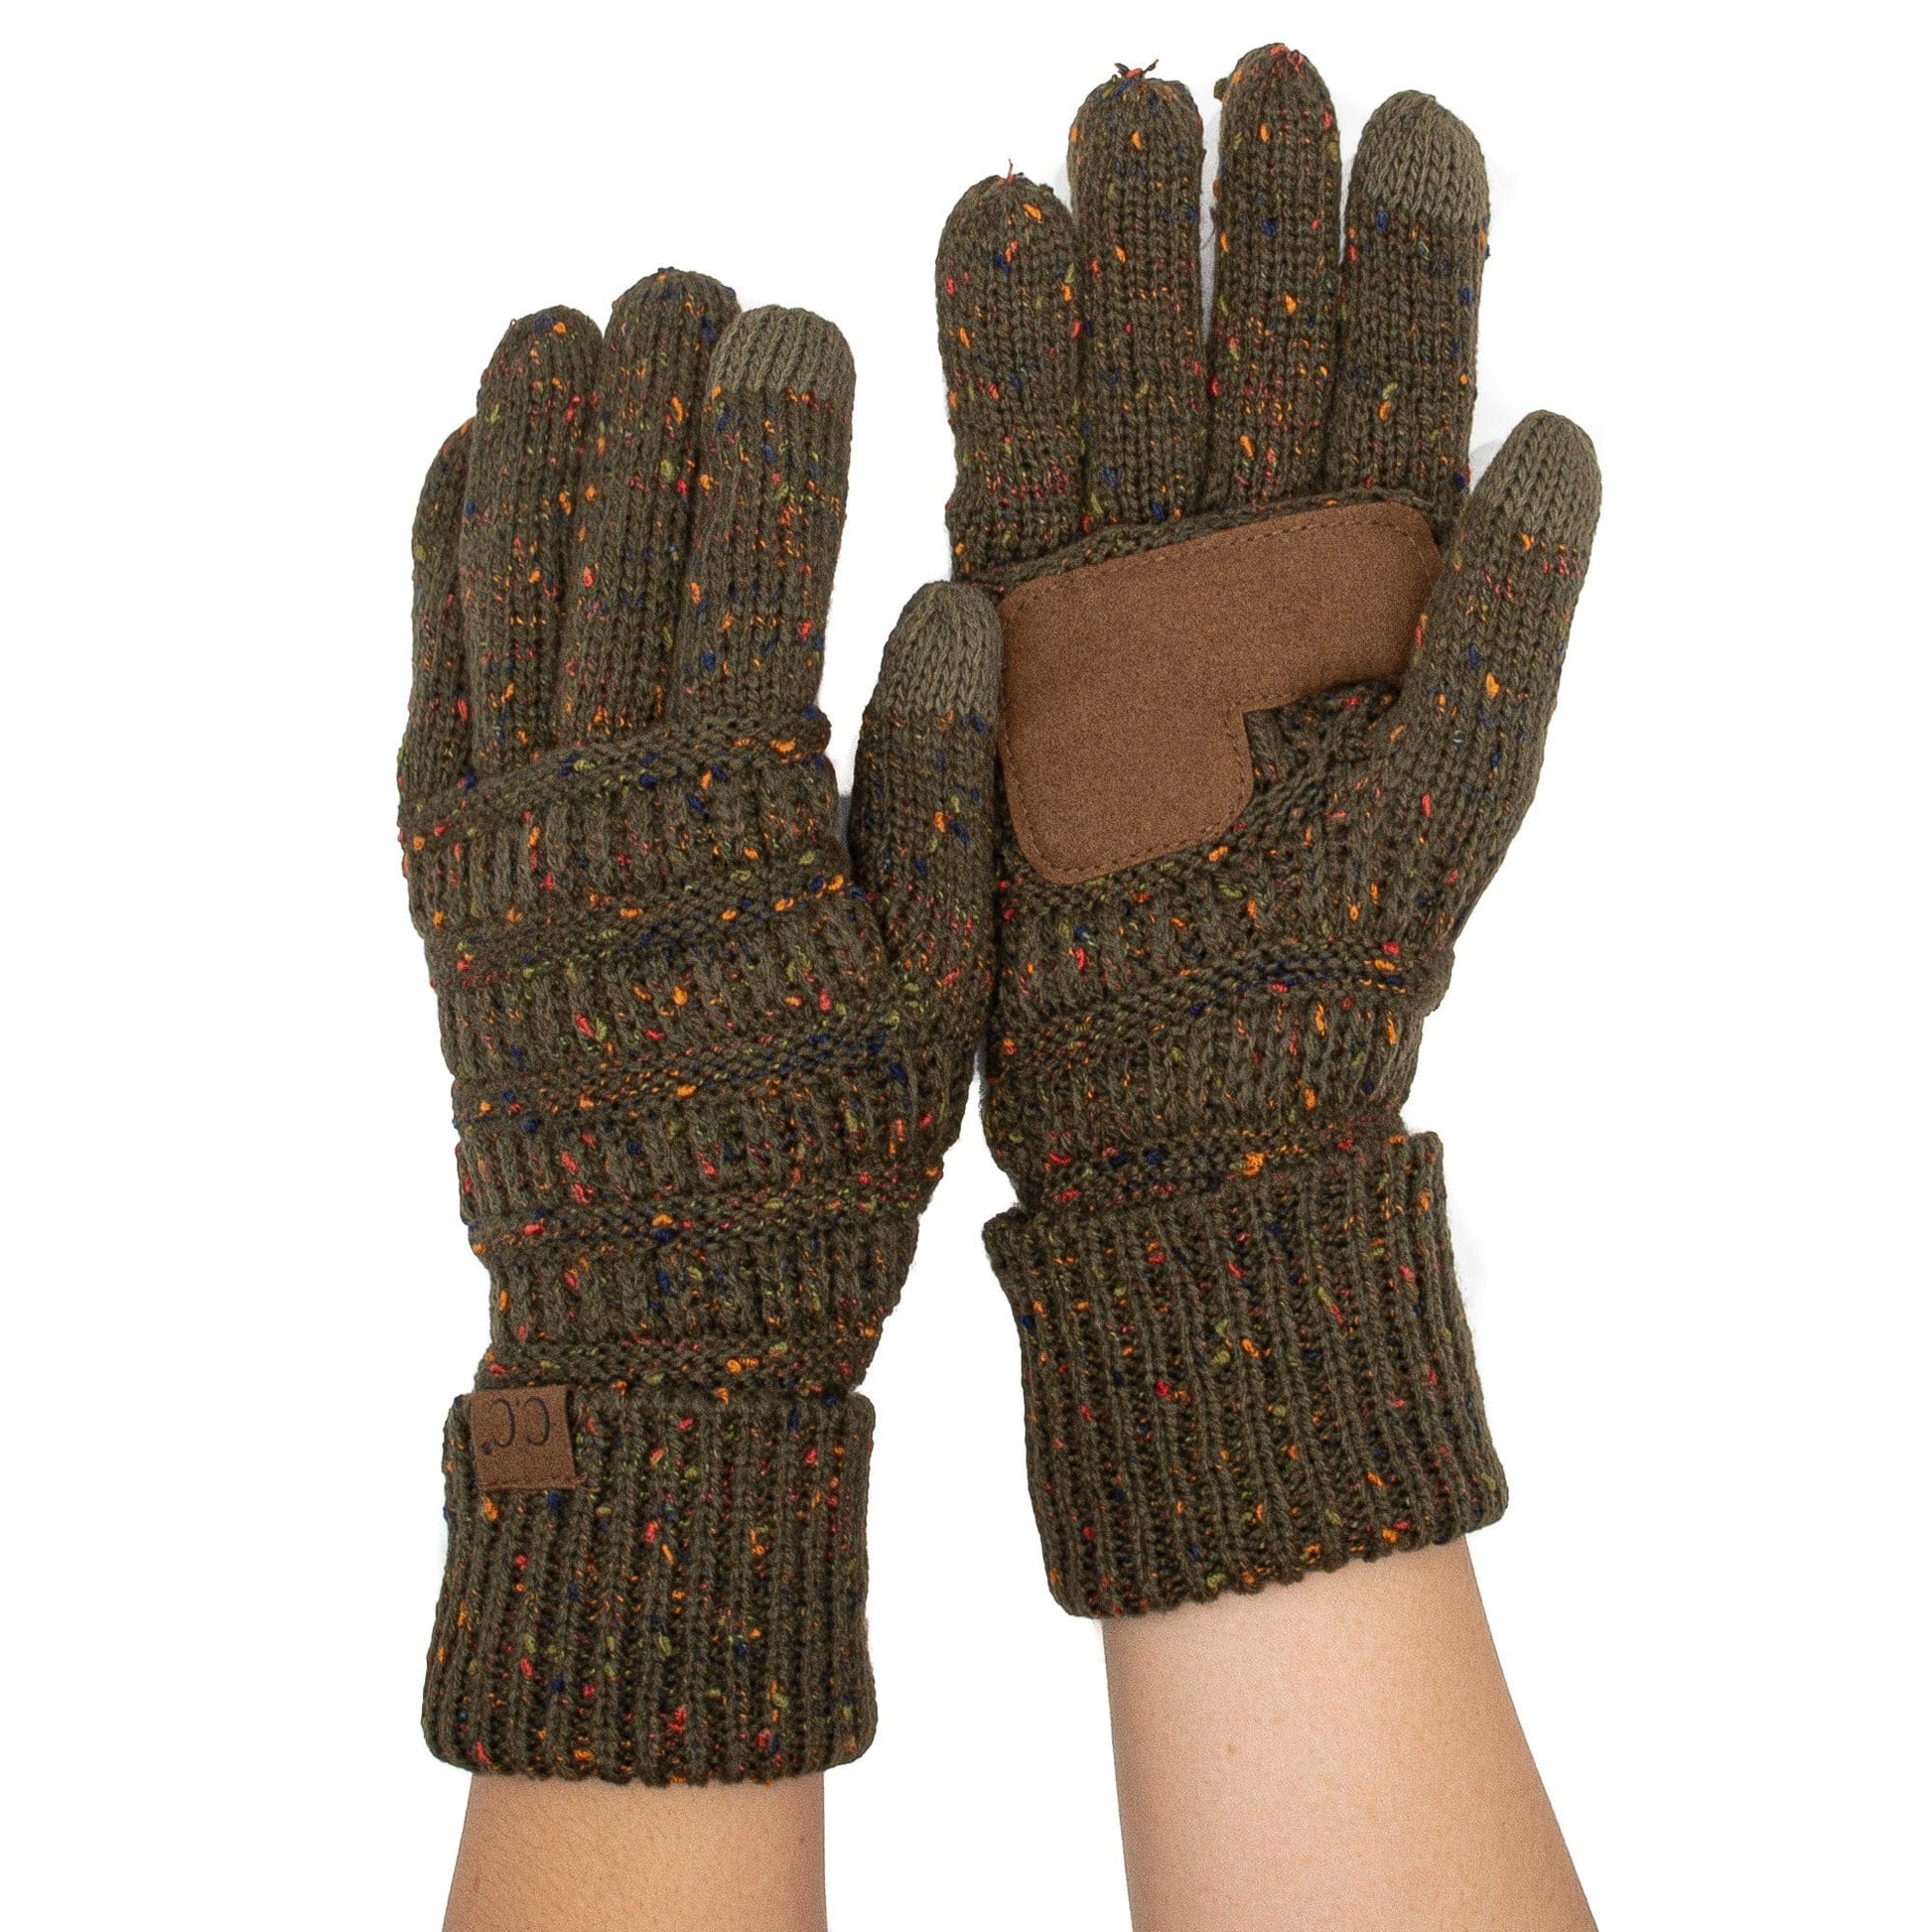 C.C Apparel Copy of C.C G20 - Unisex Cable Knit Winter Warm Anti-Slip Touchscreen Texting Gloves